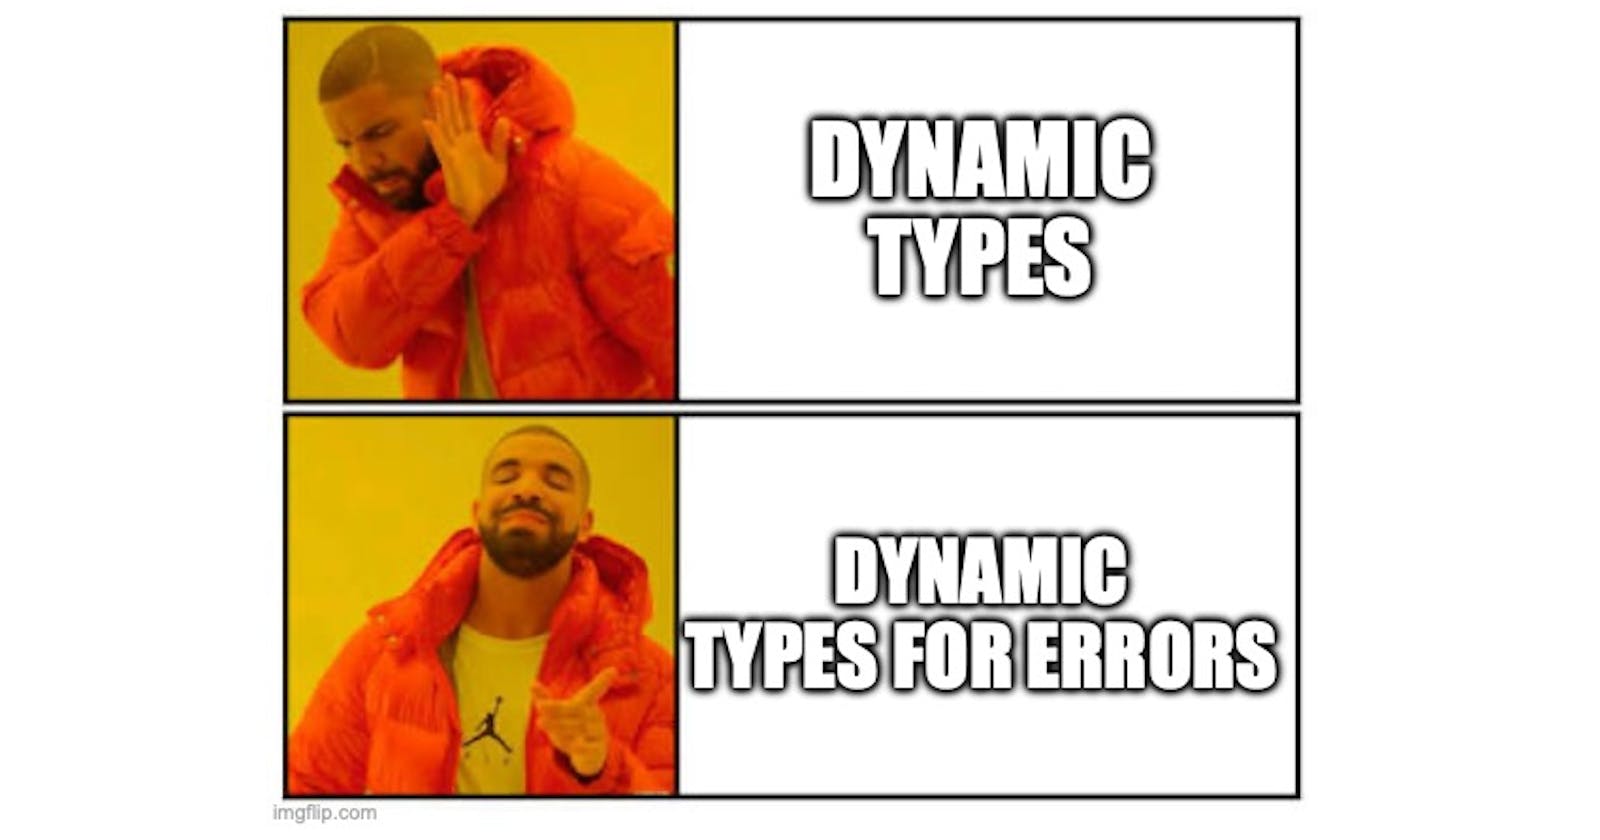 Every Argument for Static Typing Applies to Typed Errors